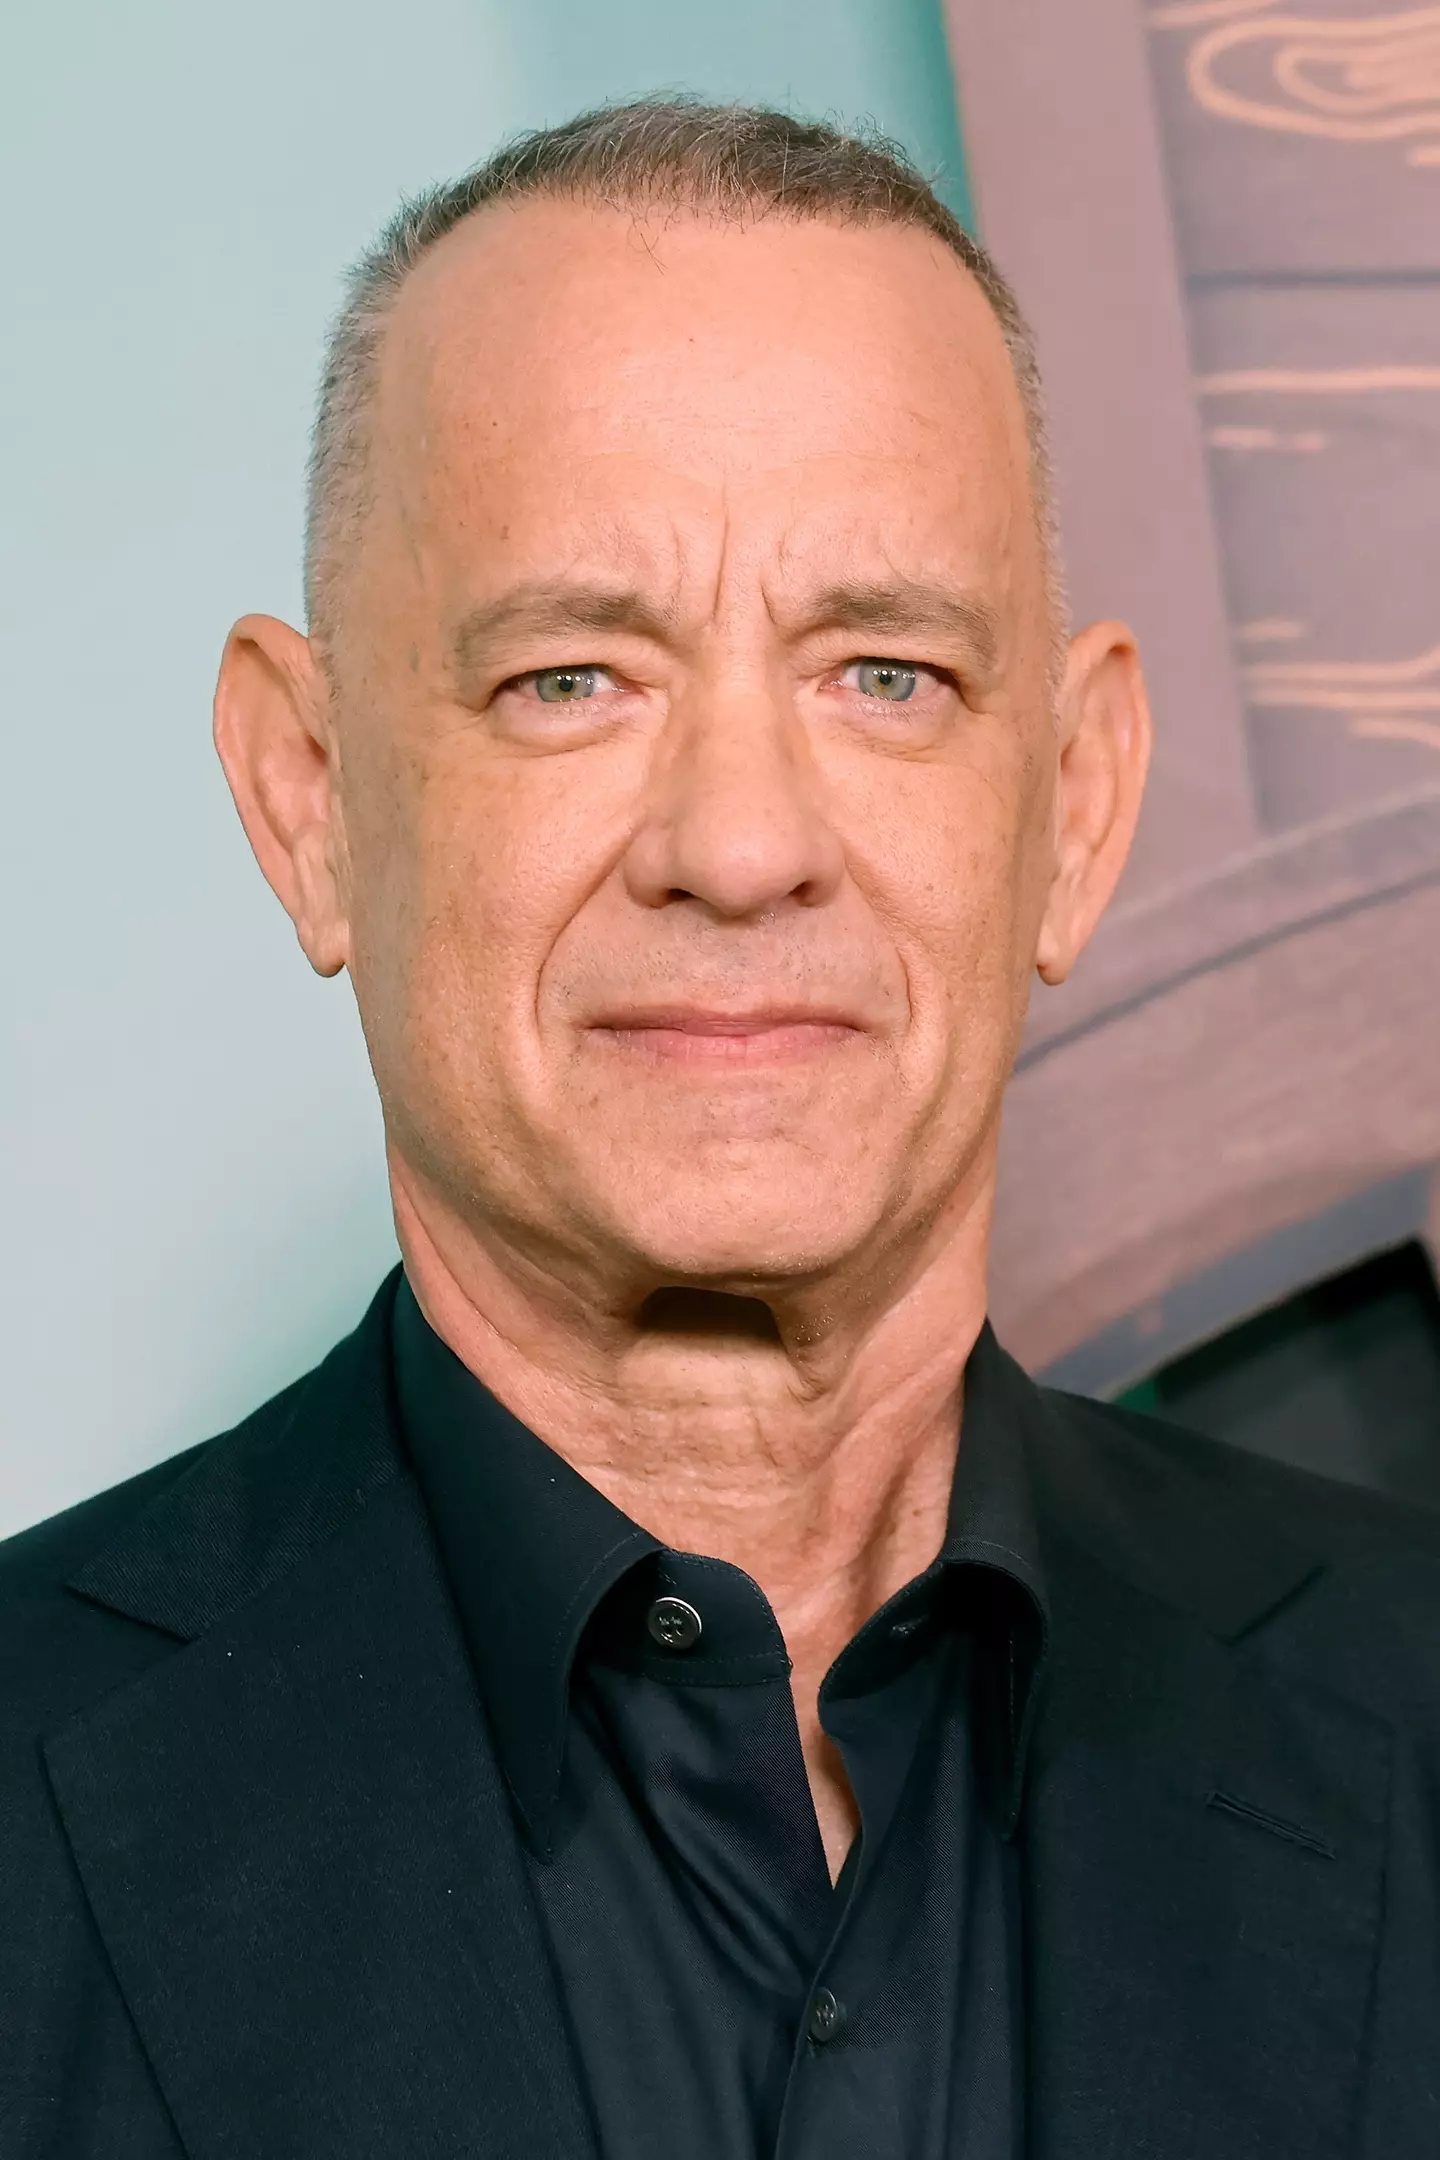 Tom Hanks was honoured earlier this year at the Golden Globes.